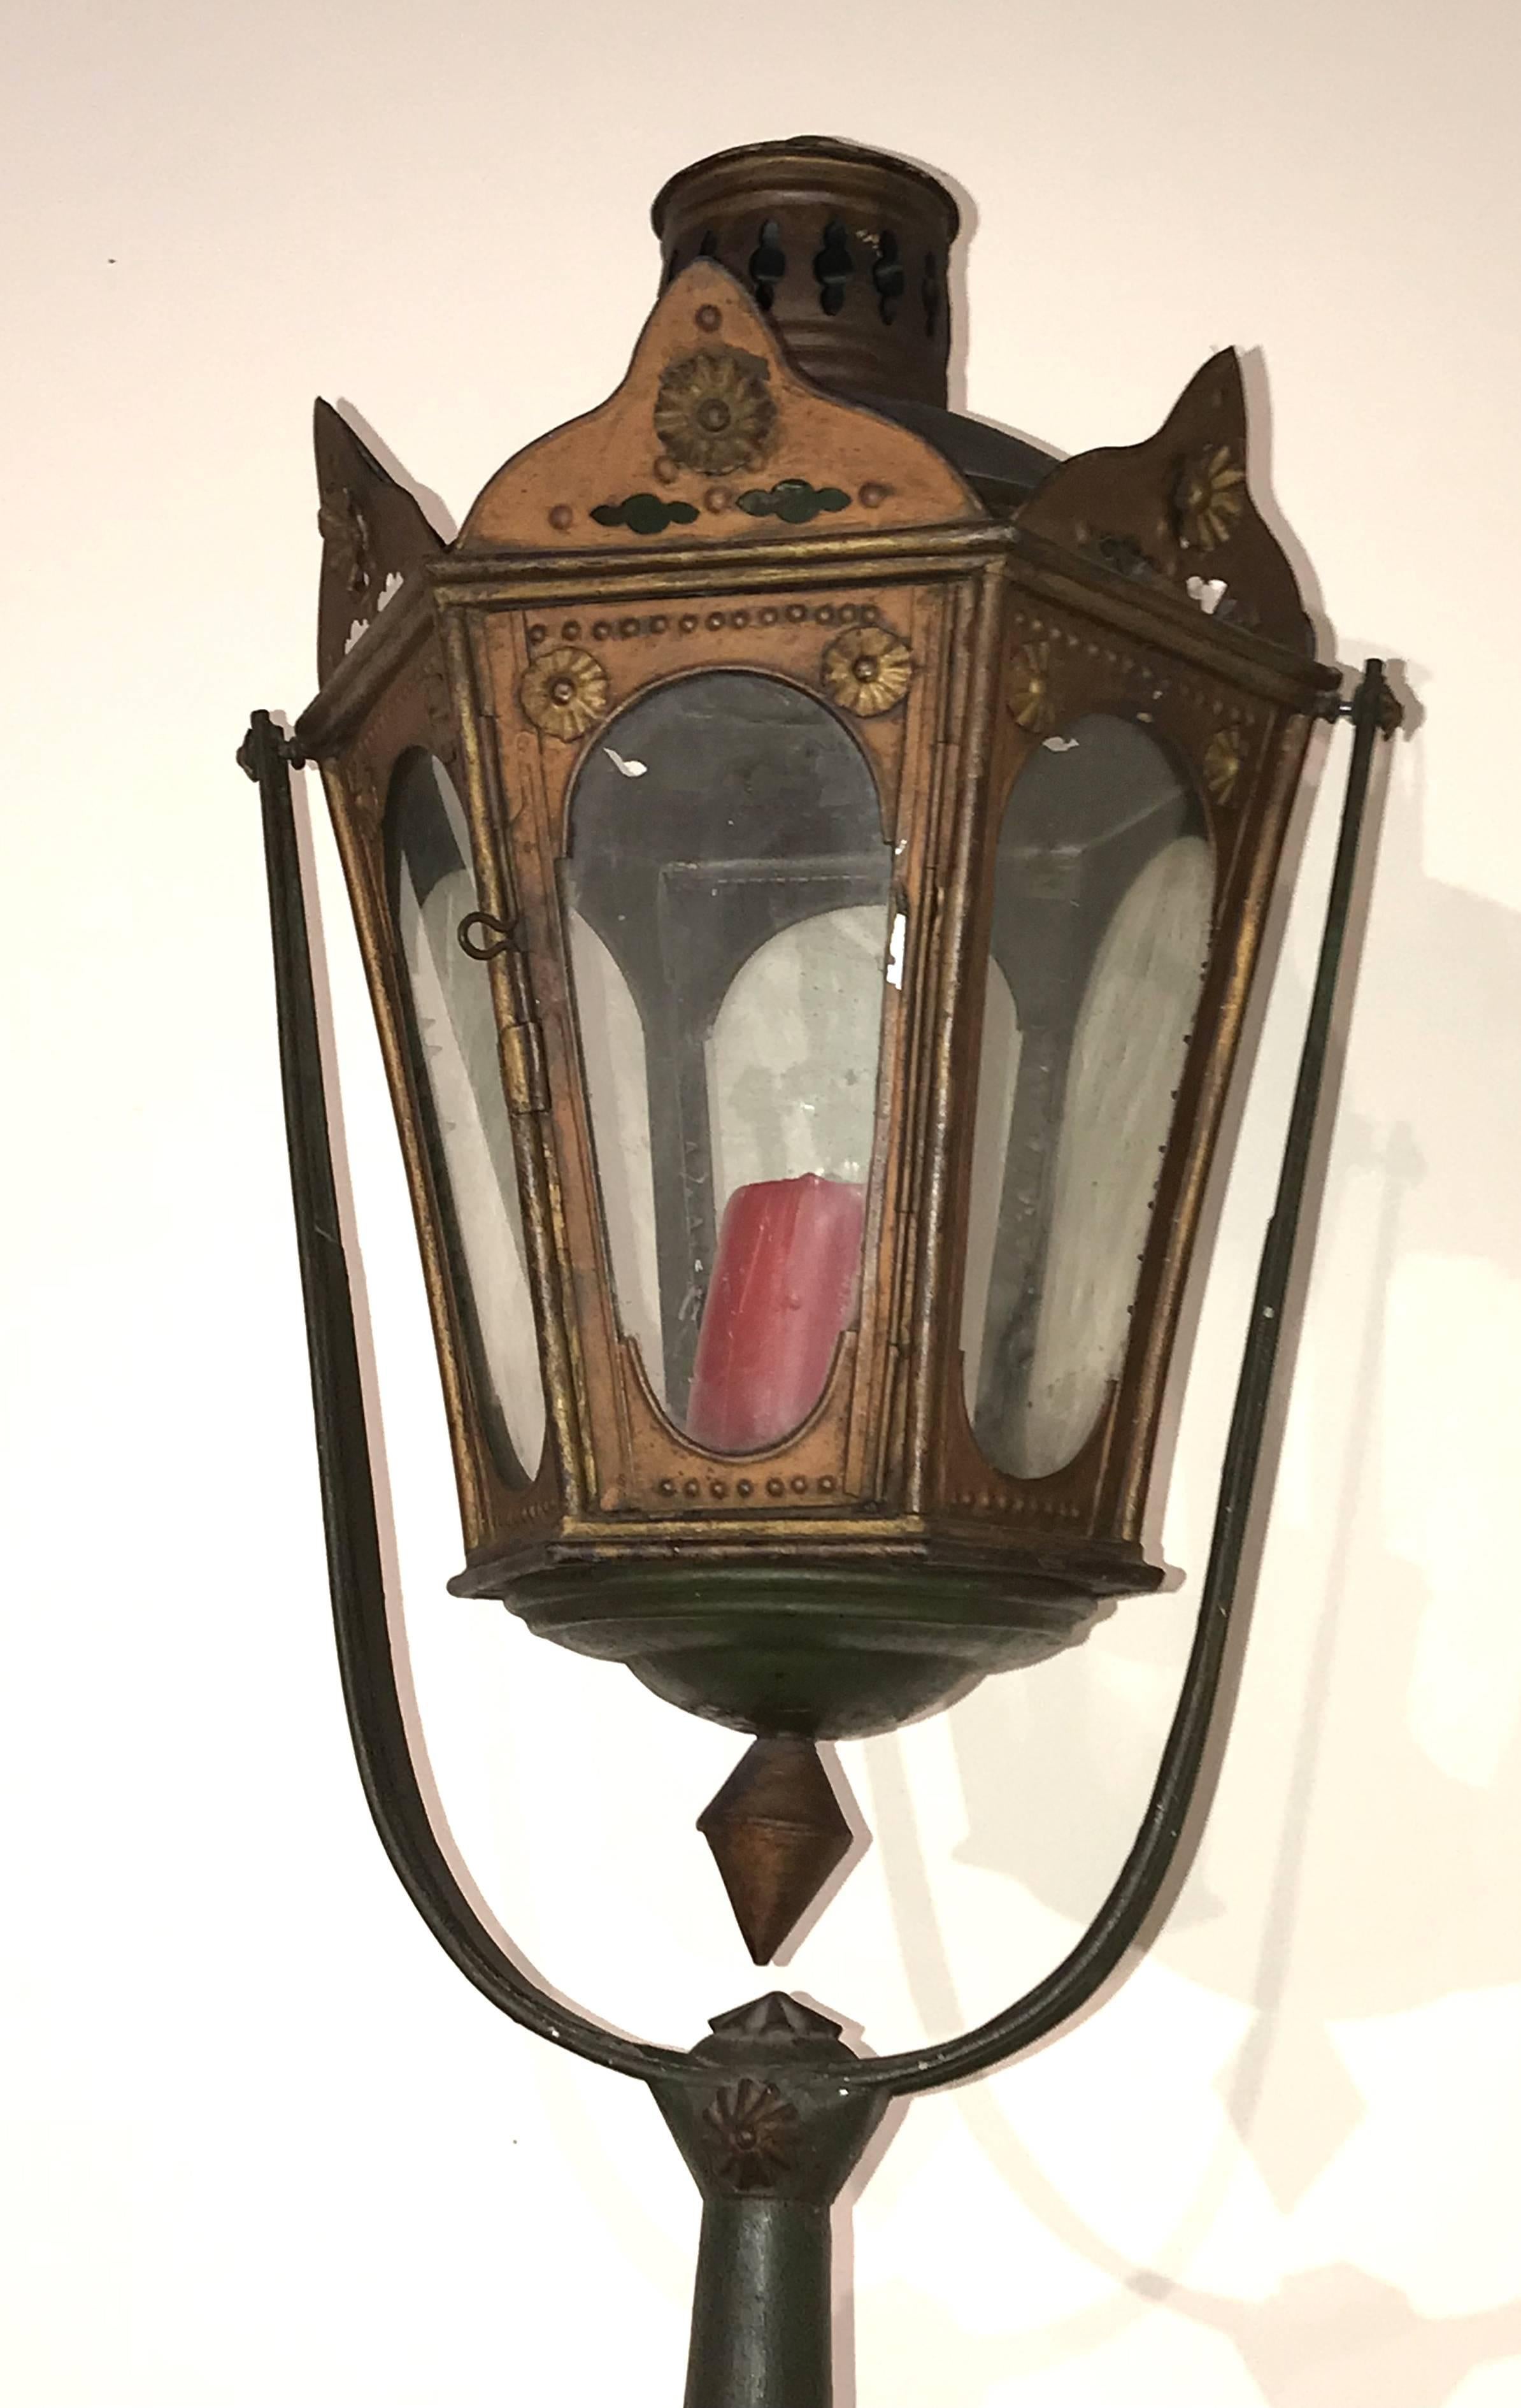 A fine example of an Italian / Venetian gondola lantern with painted hexagonal metal surround with rosette decorated crests, glass panels intact, suspended on a swinging metal support in old green paint, mounted on a red and white striped post,